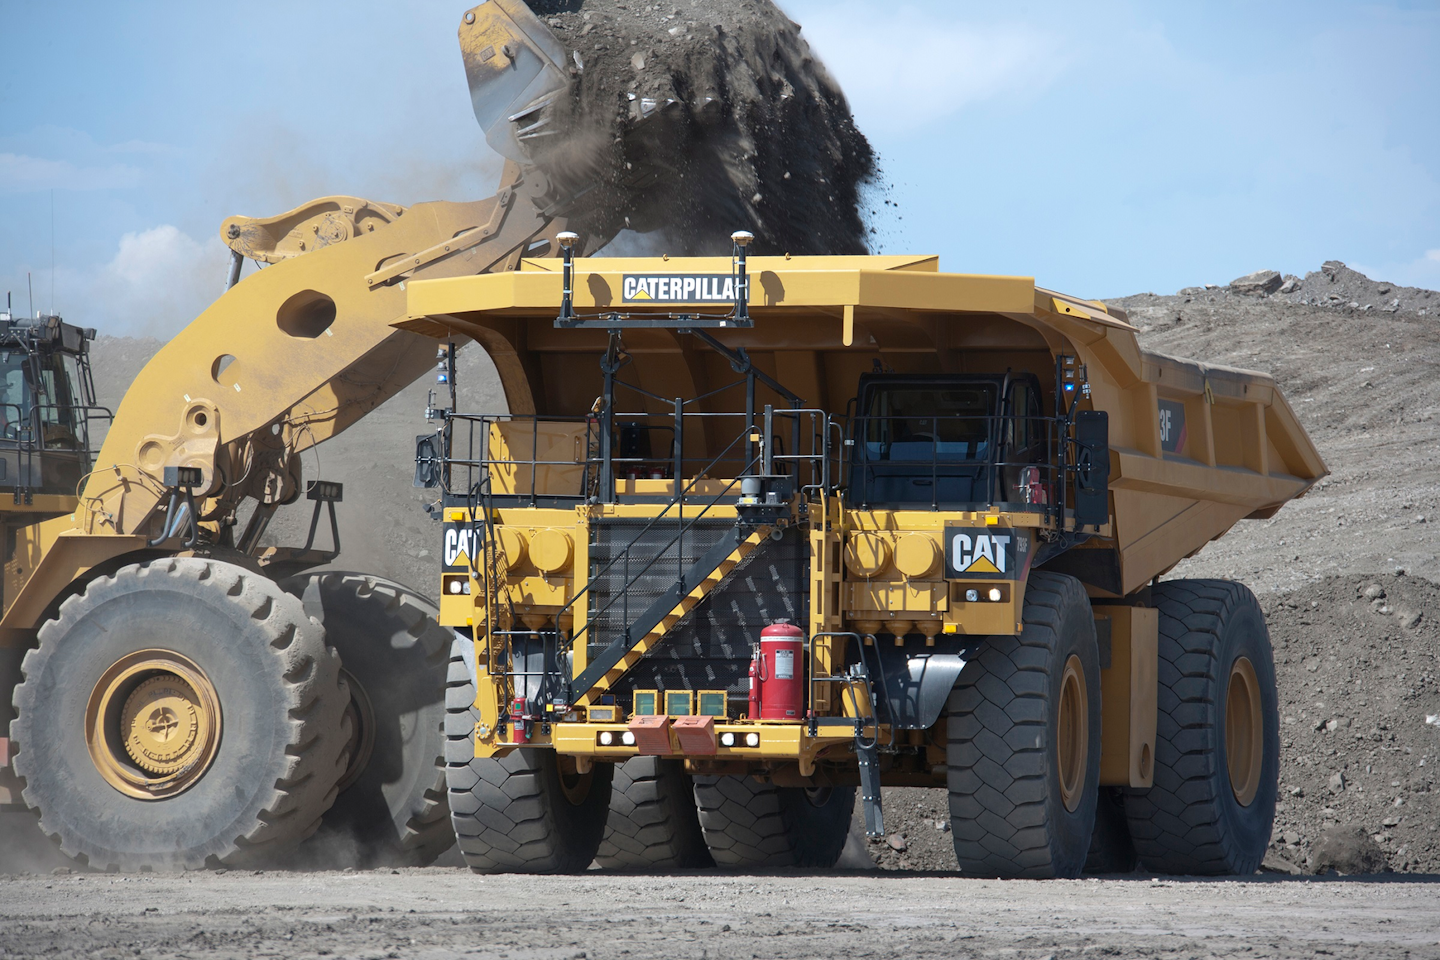 Caterpillar large mining truck being loaded